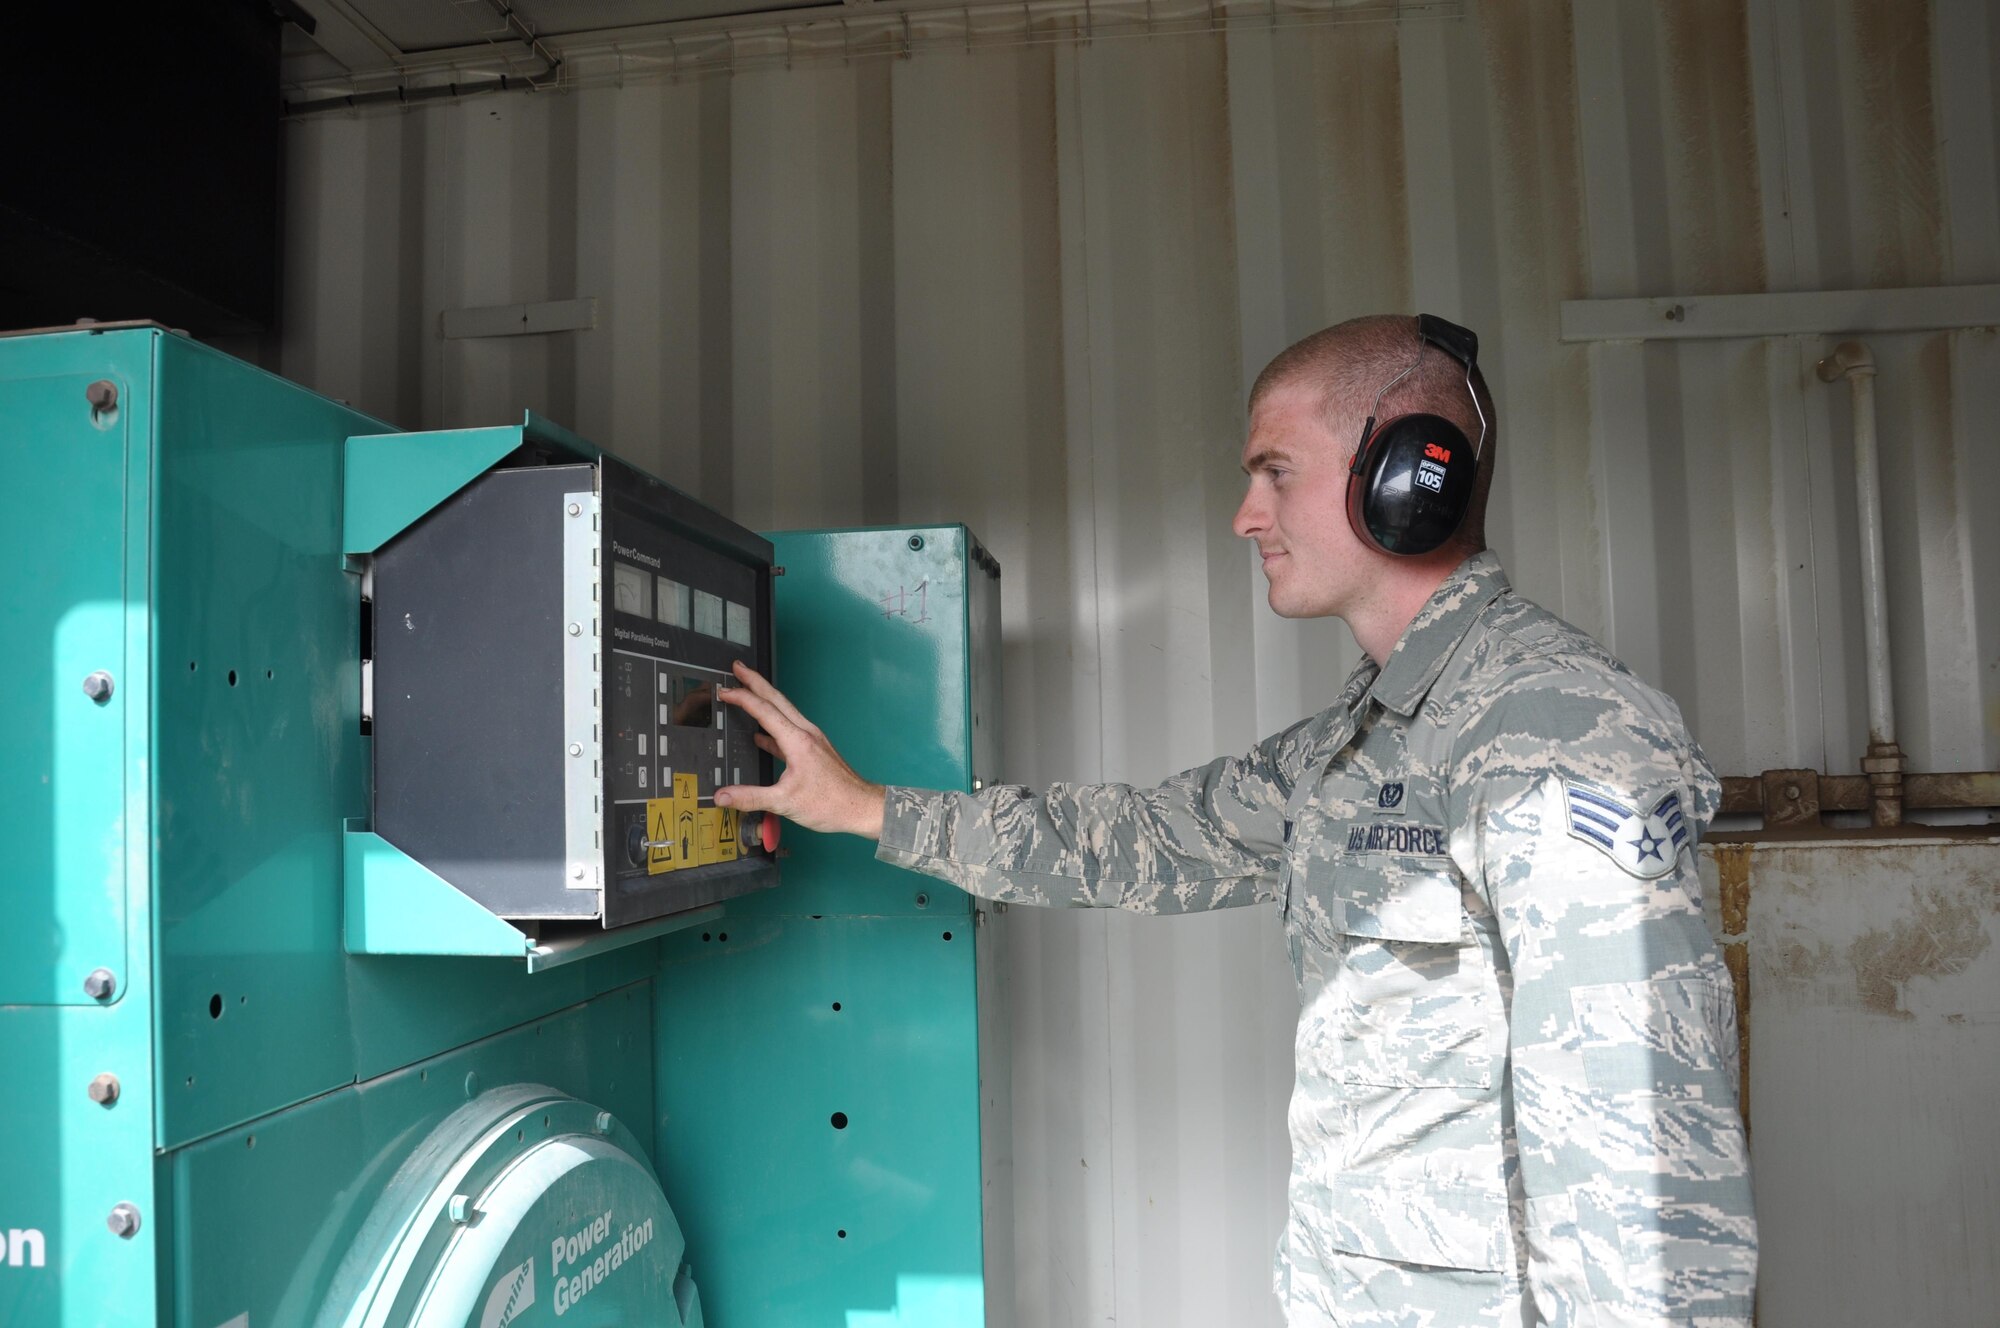 Senior Airman Ethan J. Weidner, a power production technician with the 386th Expeditionary Civil Engineer Squadron, makes adjustments to a power generator during a preventative maintenance check during a preventative maintenance check Wednesday May 10, 2017, at an undisclosed location in Southwest Asia. The power generators serve as a supplement to the host nation electrical grid. Senior Airman Weidner is deployed from the 786th Civil Engineer Squadron of Ramstein Air Base, Germany.
